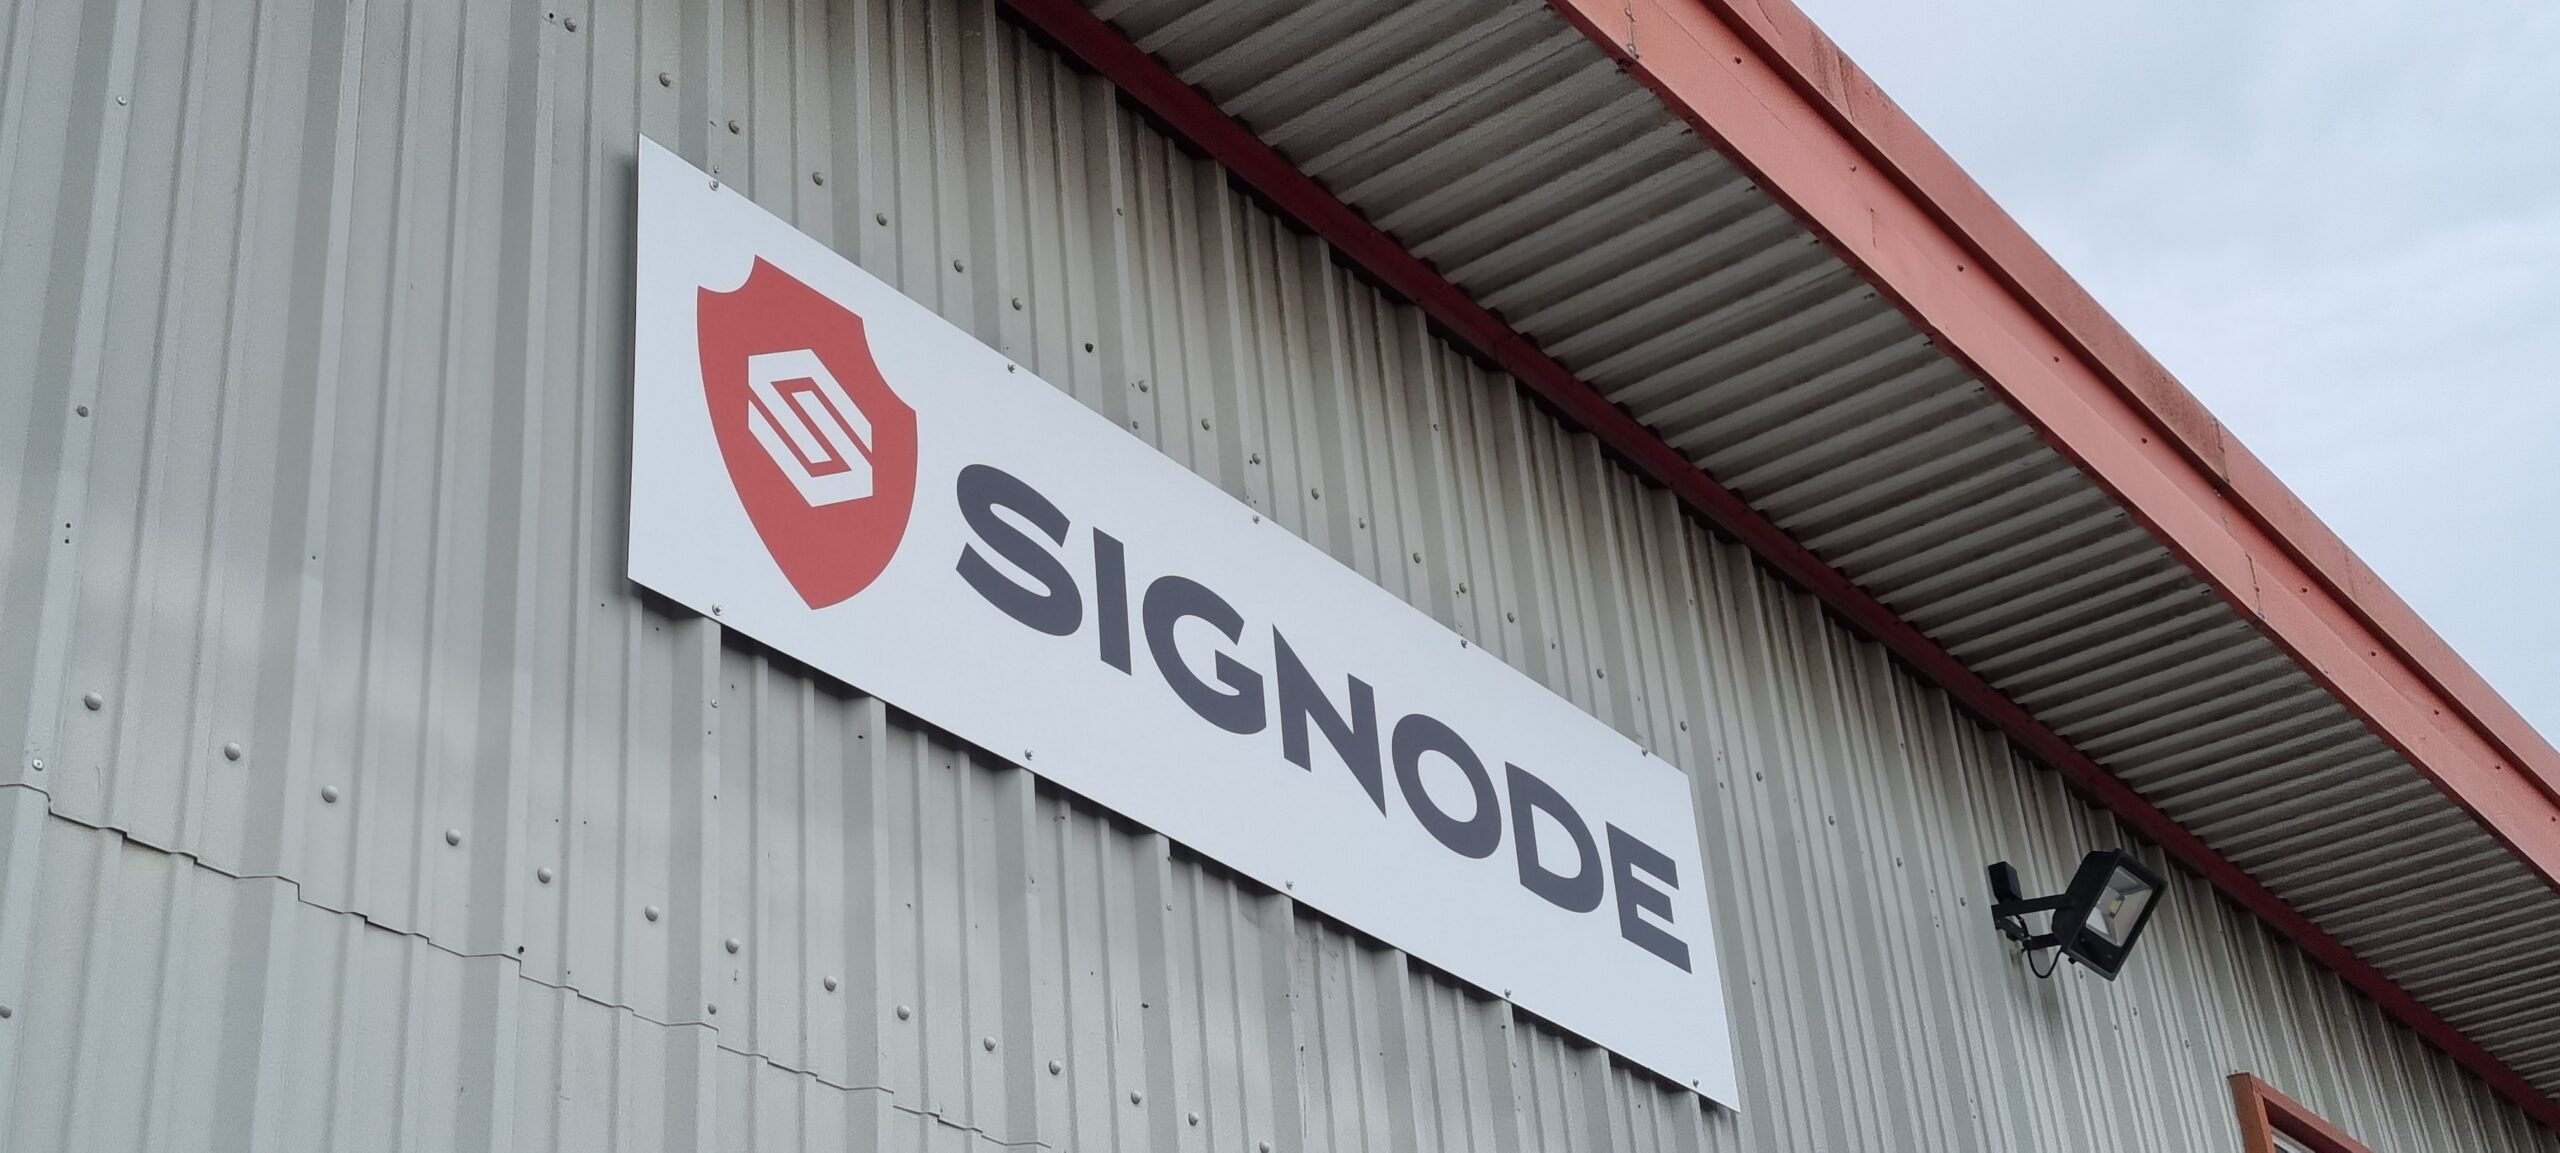 Photograph looking up at a grey corrugated industrial building with a sign that reads “Signode”